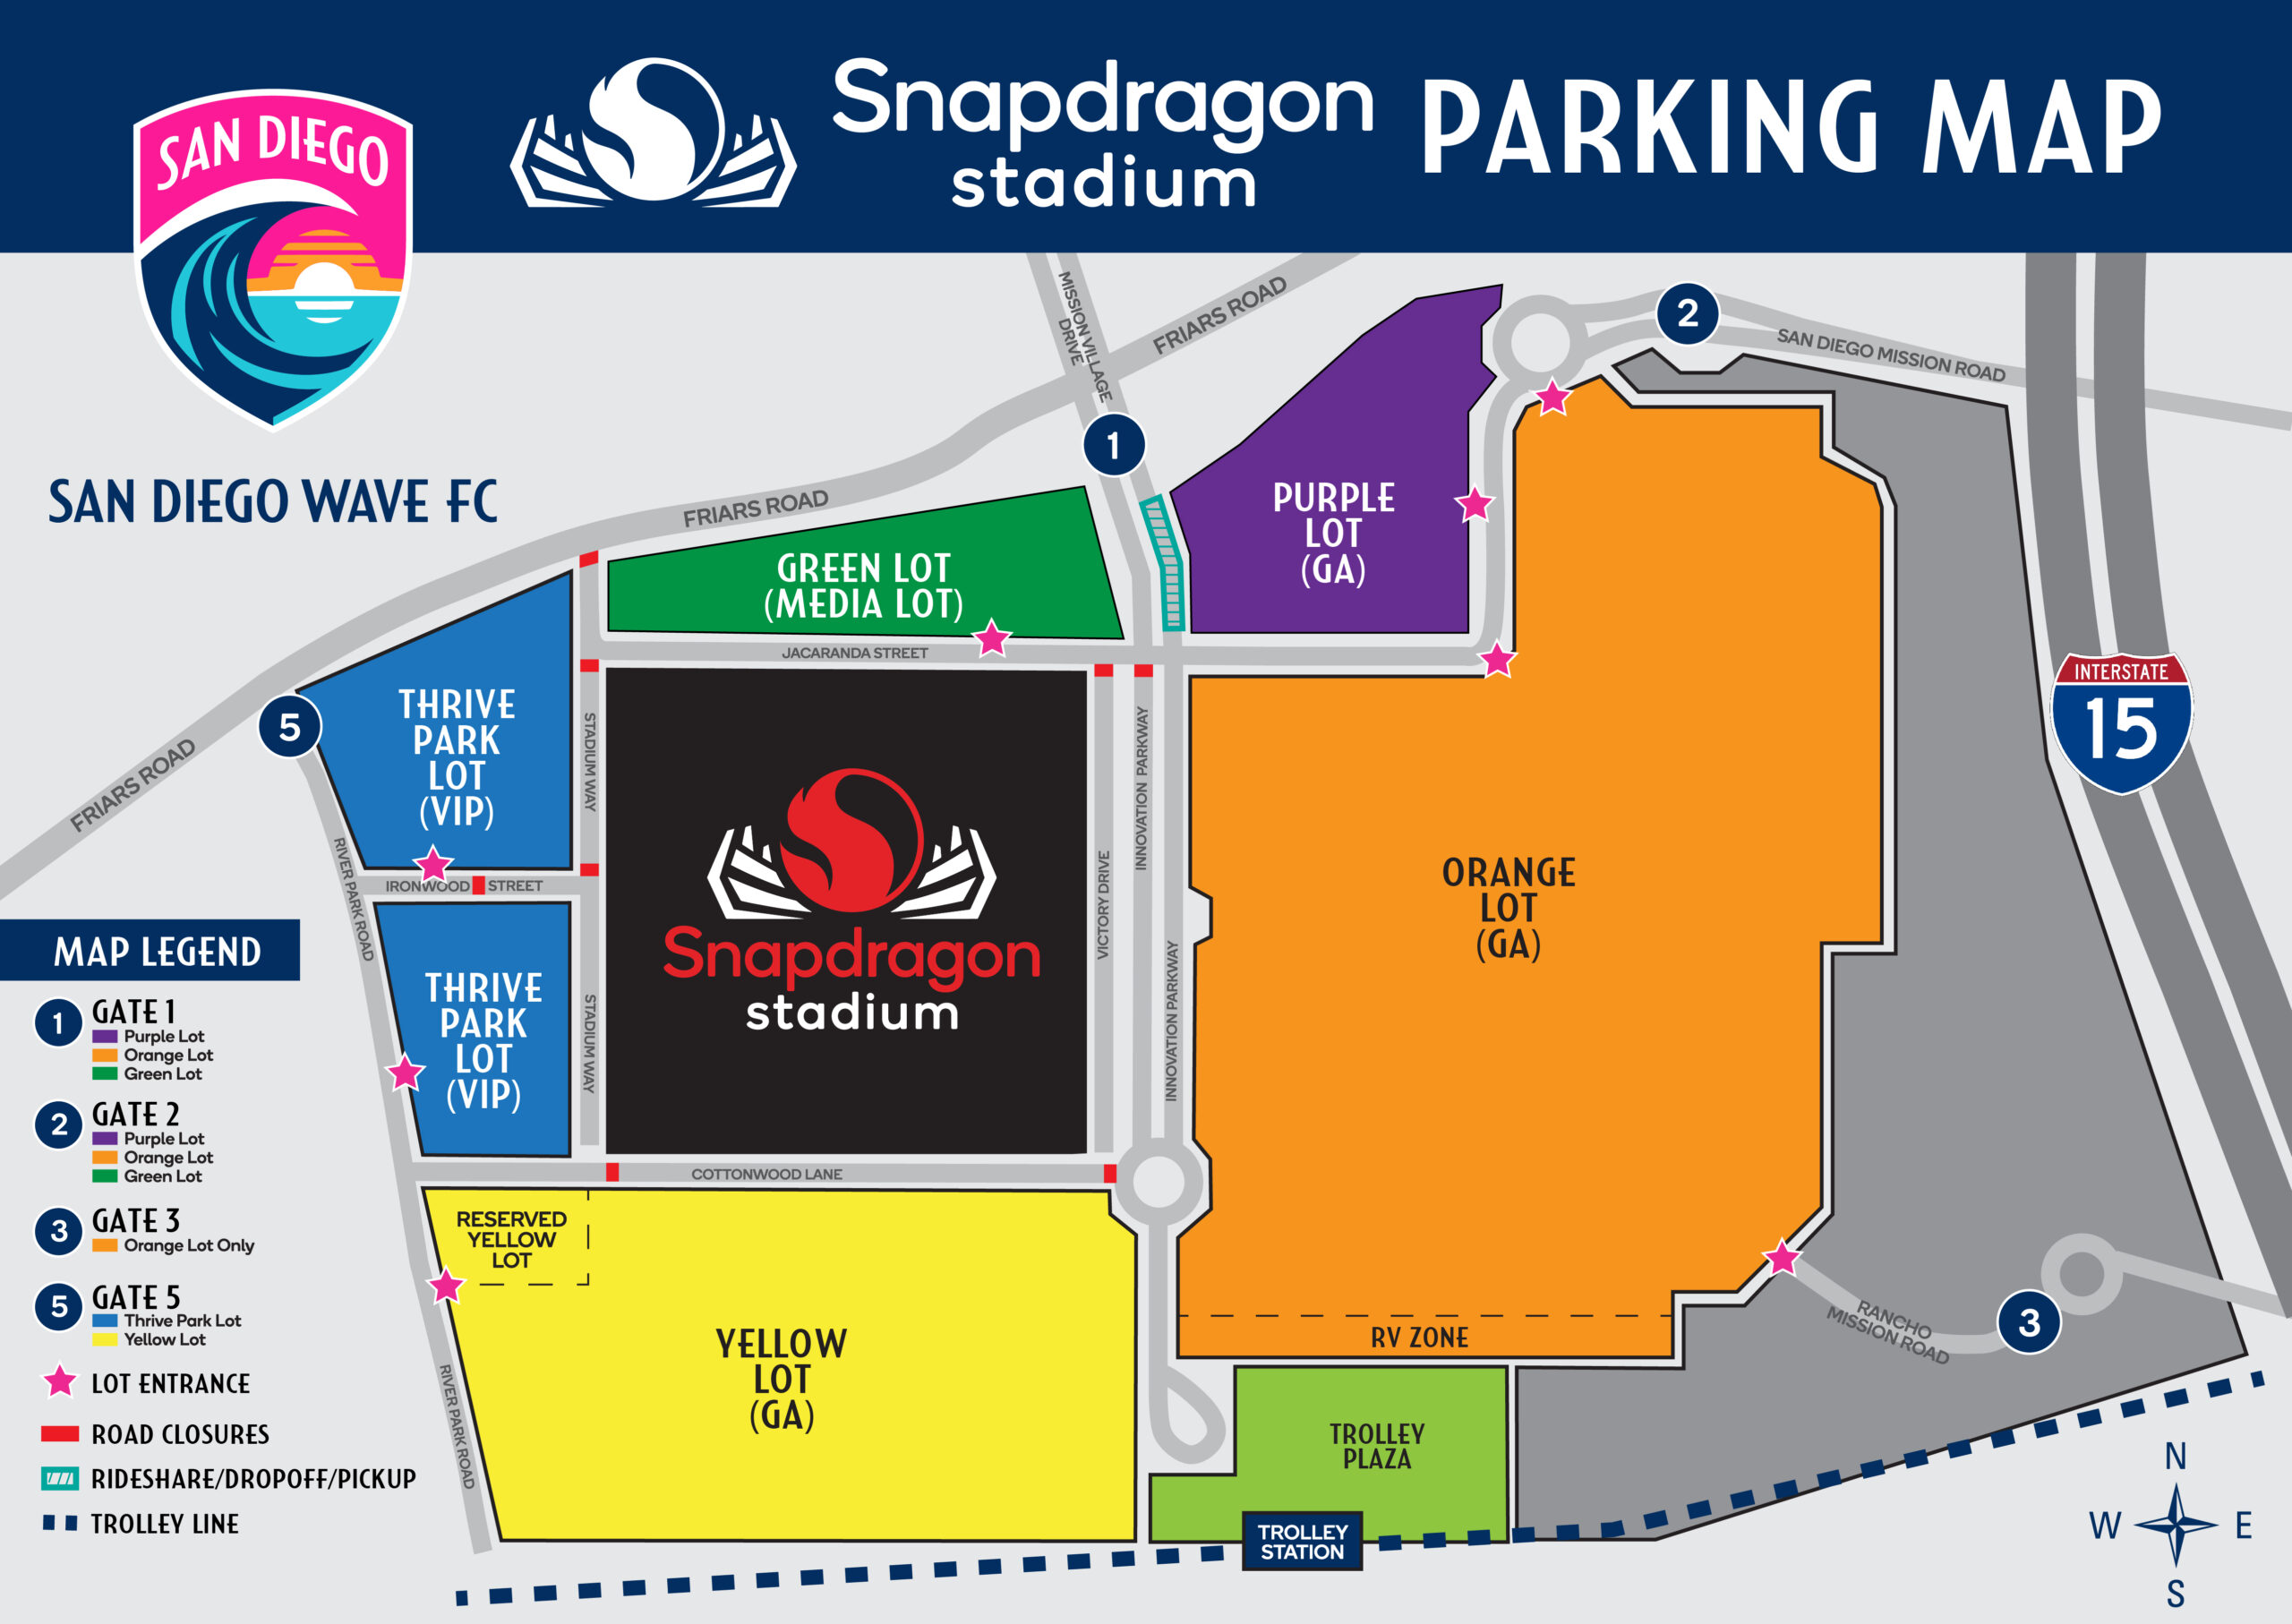 What are the parking zones at Snapdragon Stadium? San Diego Wave